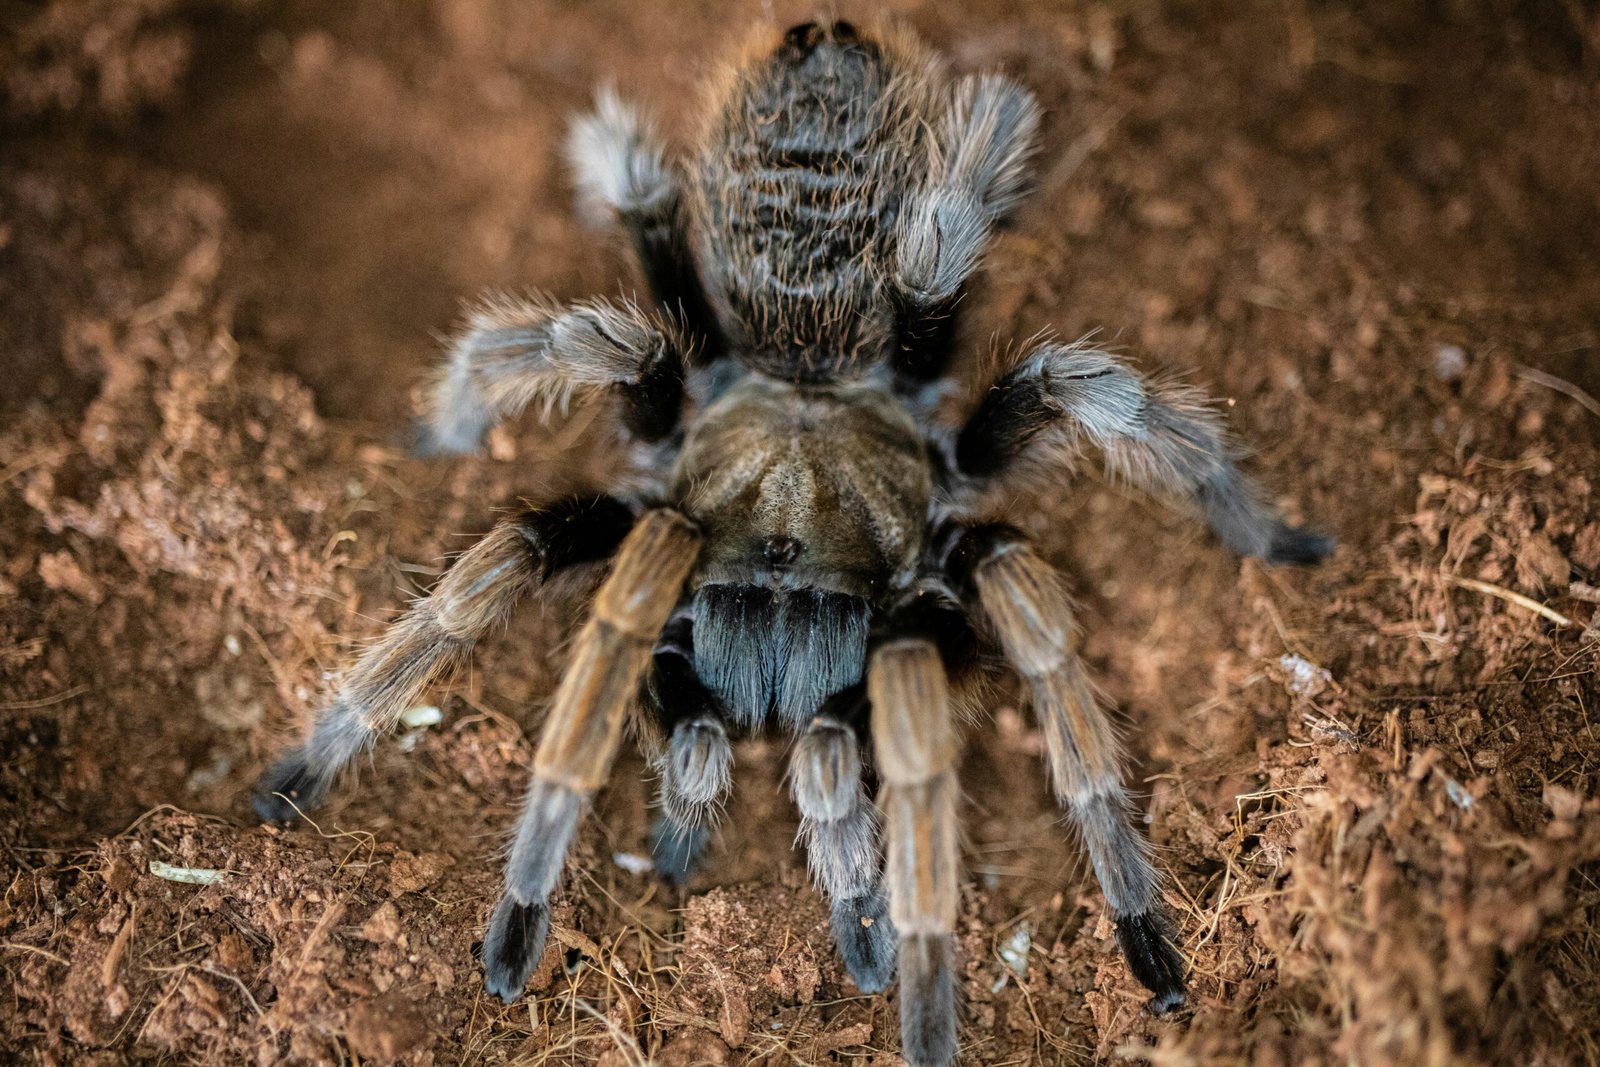 How Do I Handle A Tarantula Molting Process, And Should I Remove Uneaten Prey During This Time?